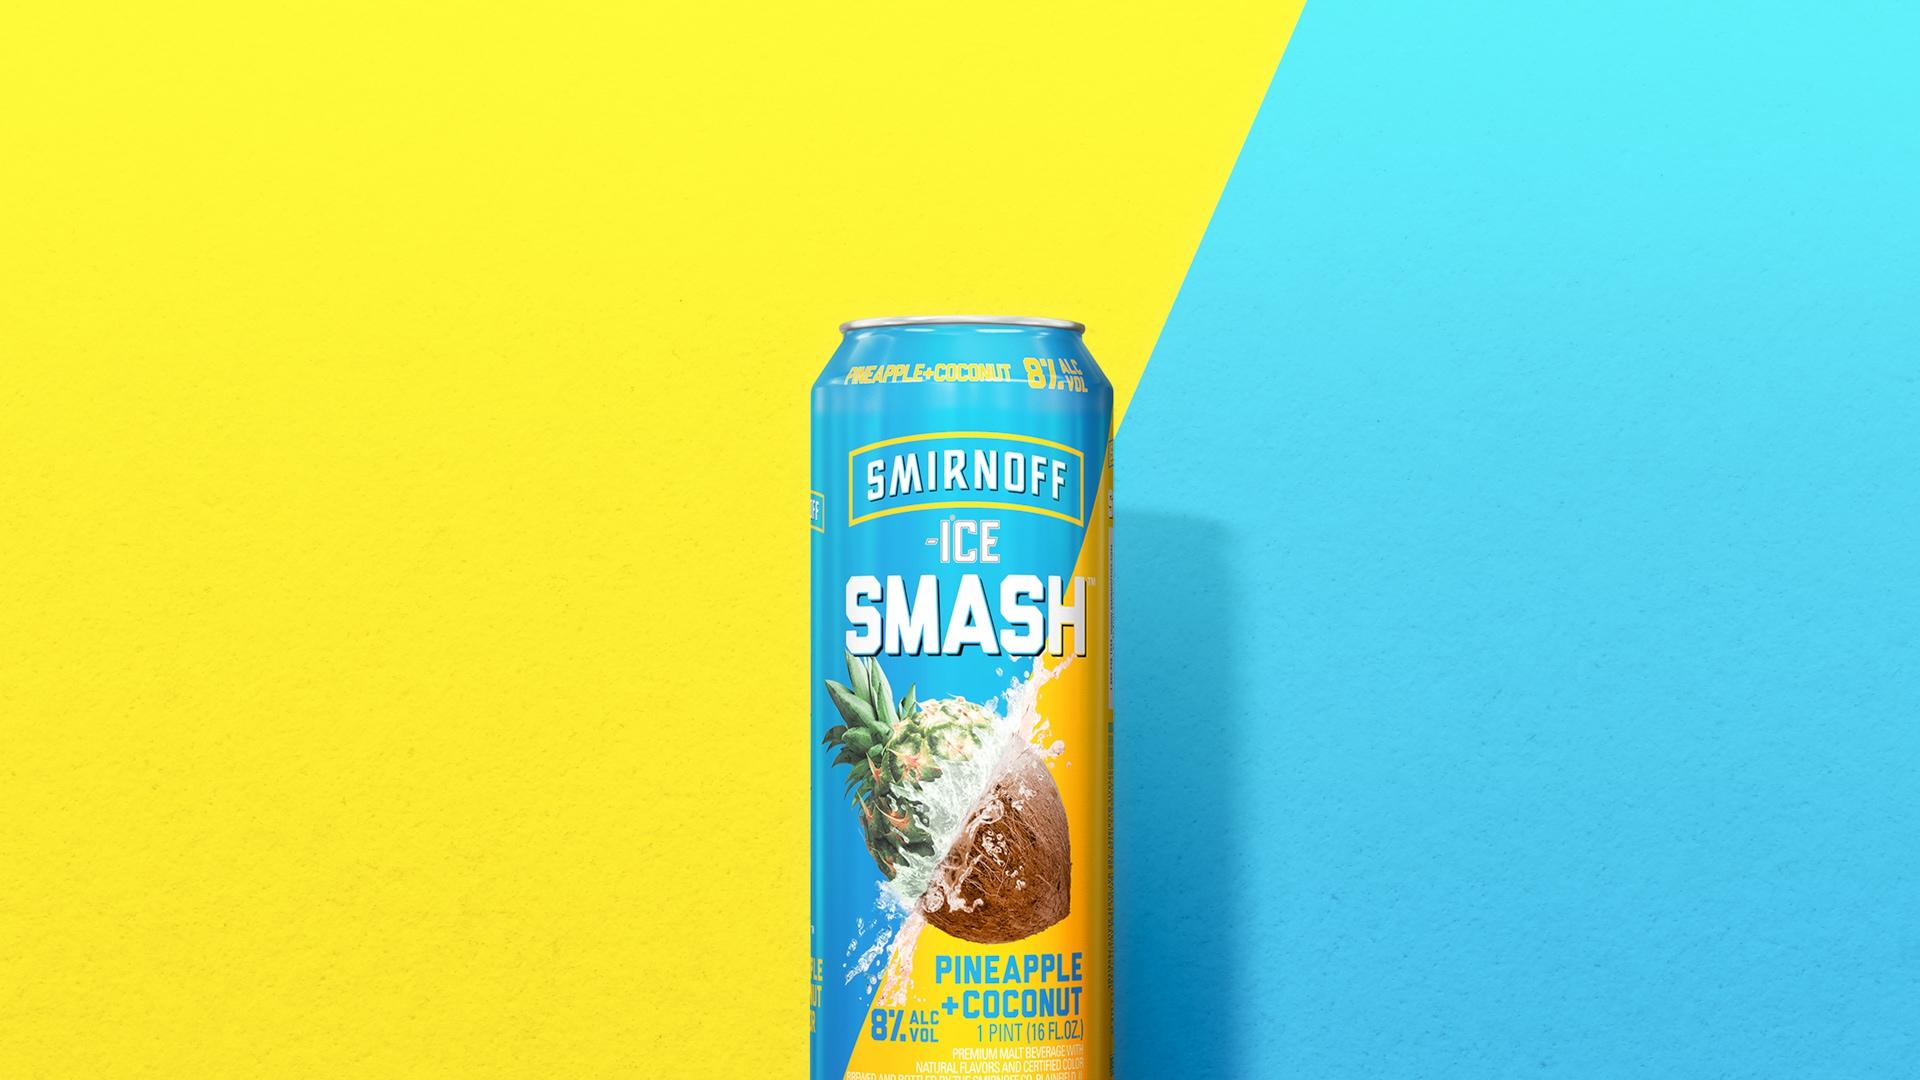 Smirnoff Ice Smash Pineapple + Coconut on a two tone background